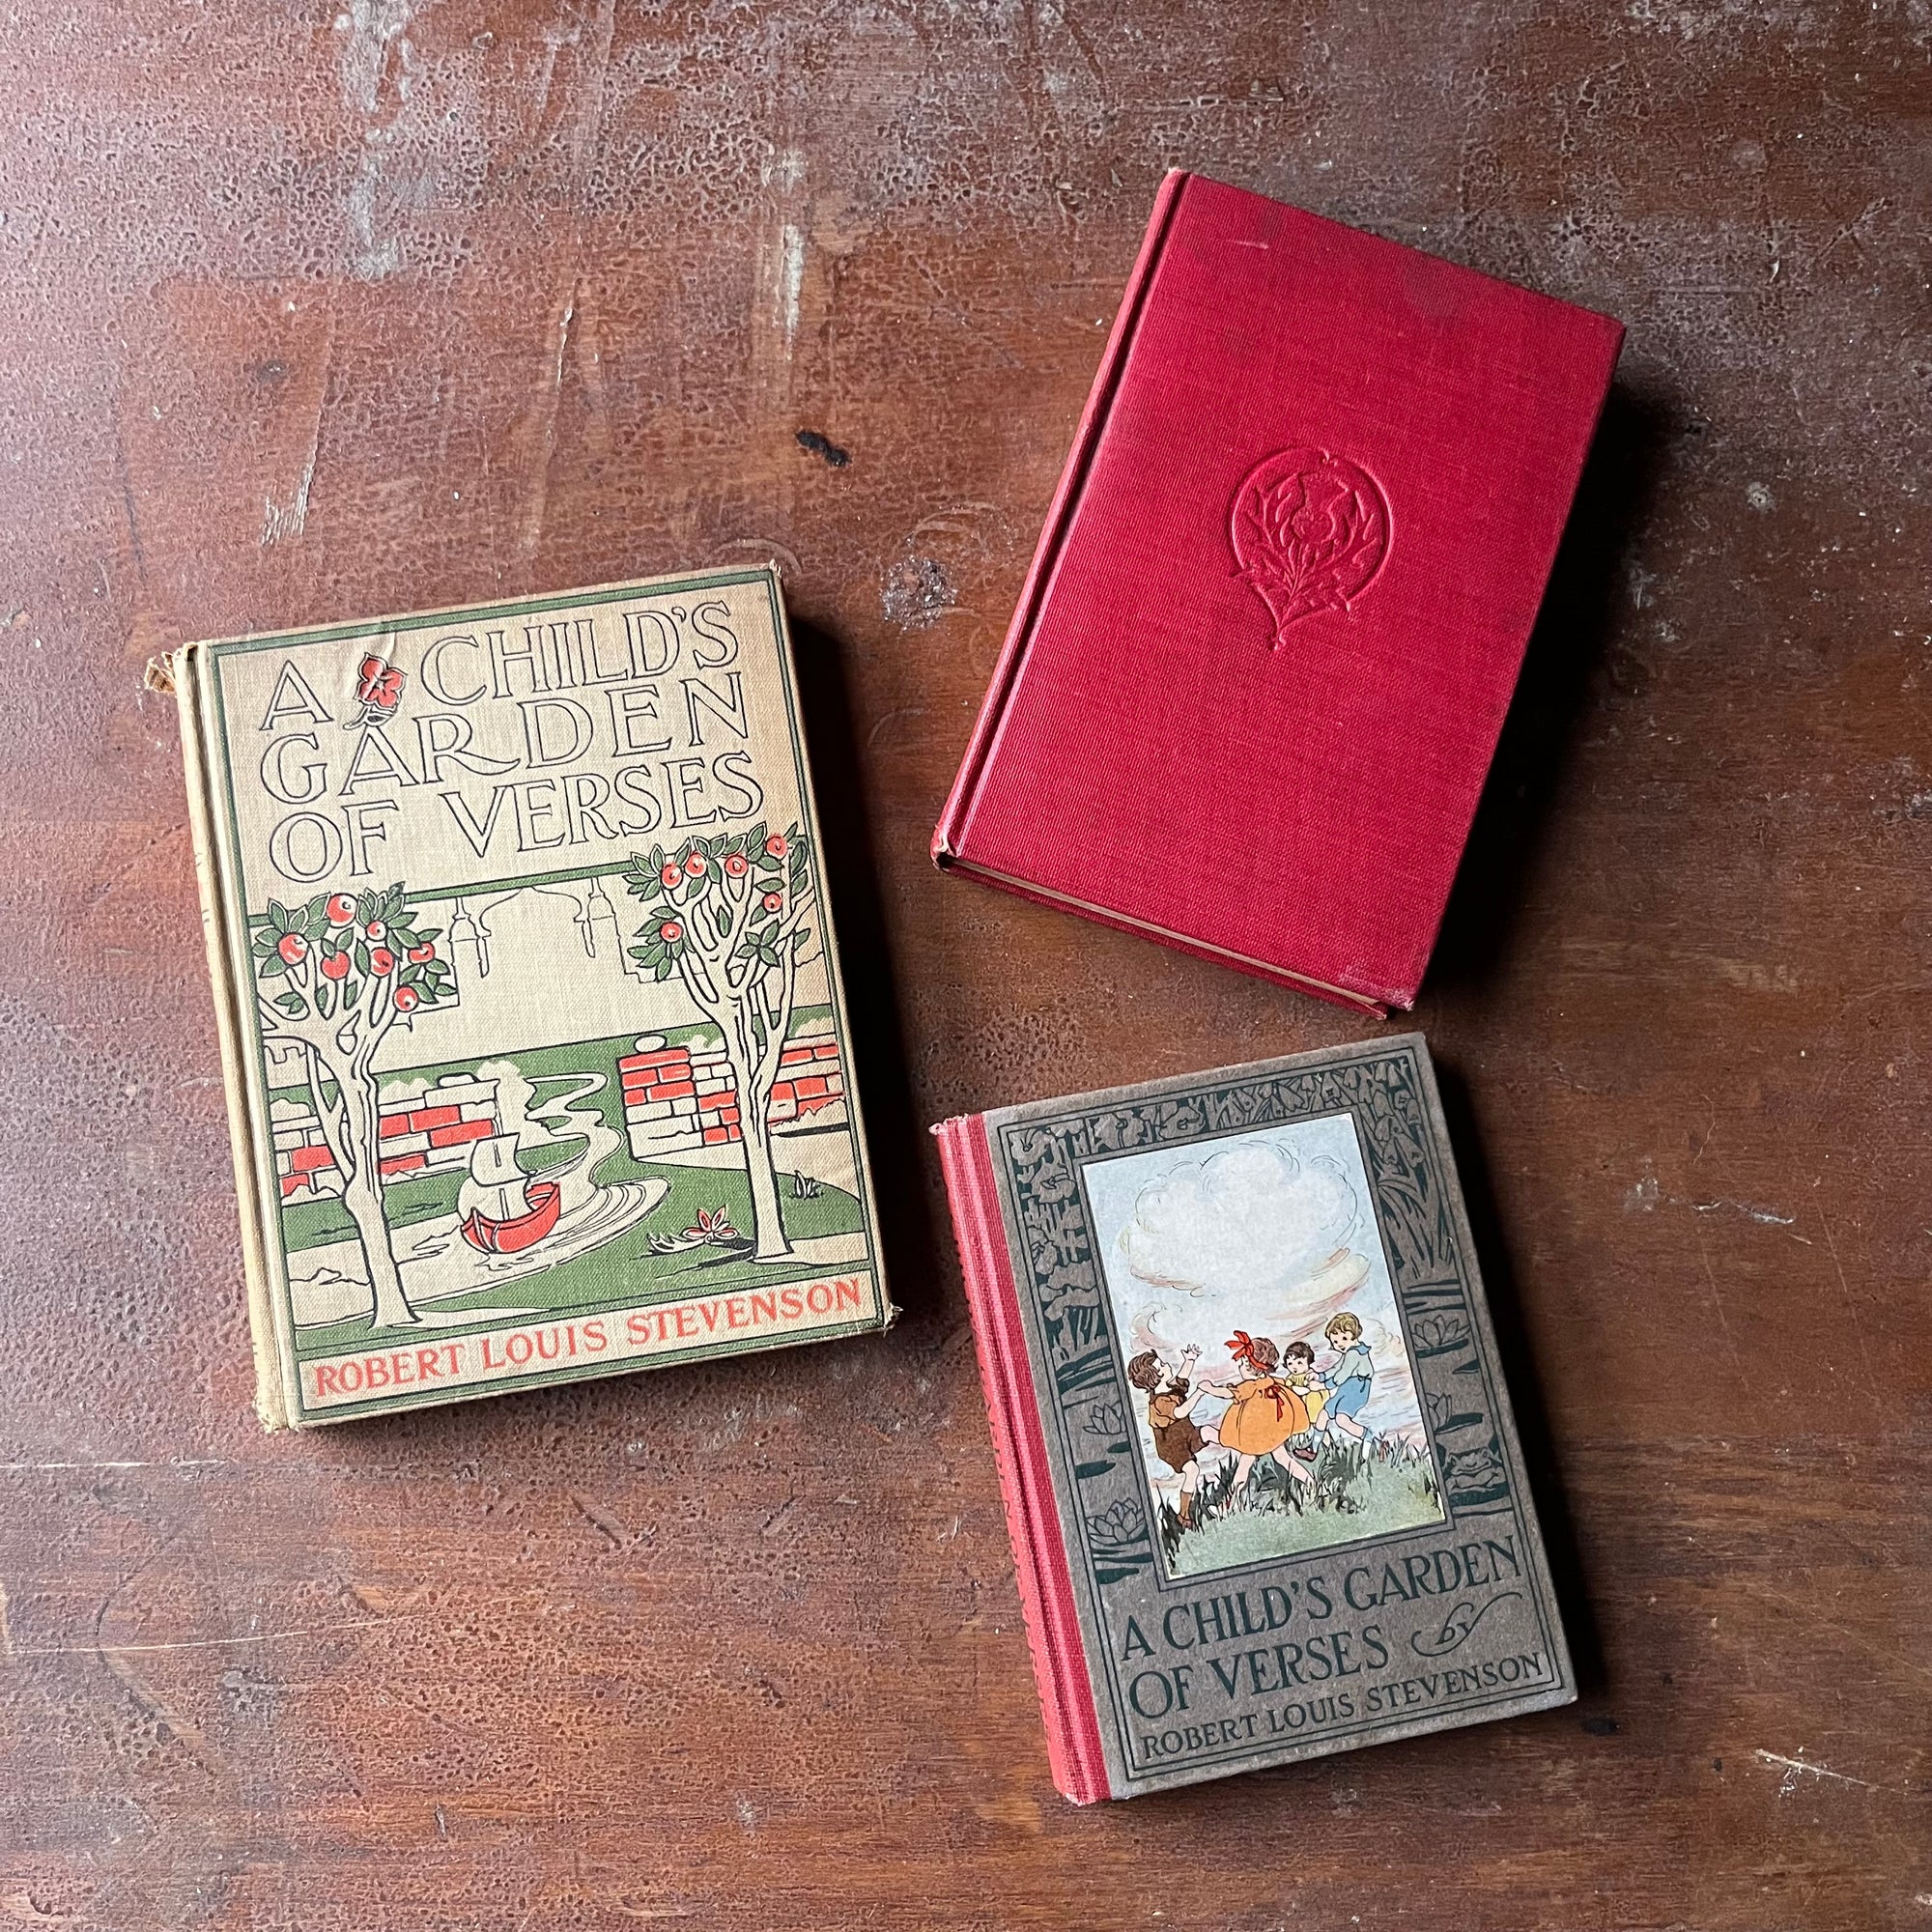 Set of Three Robert Louis Stevenson's A Child's Book of Verses-vintage children's poetry books - view of the book's front covers - two are decorated & one is plain red.